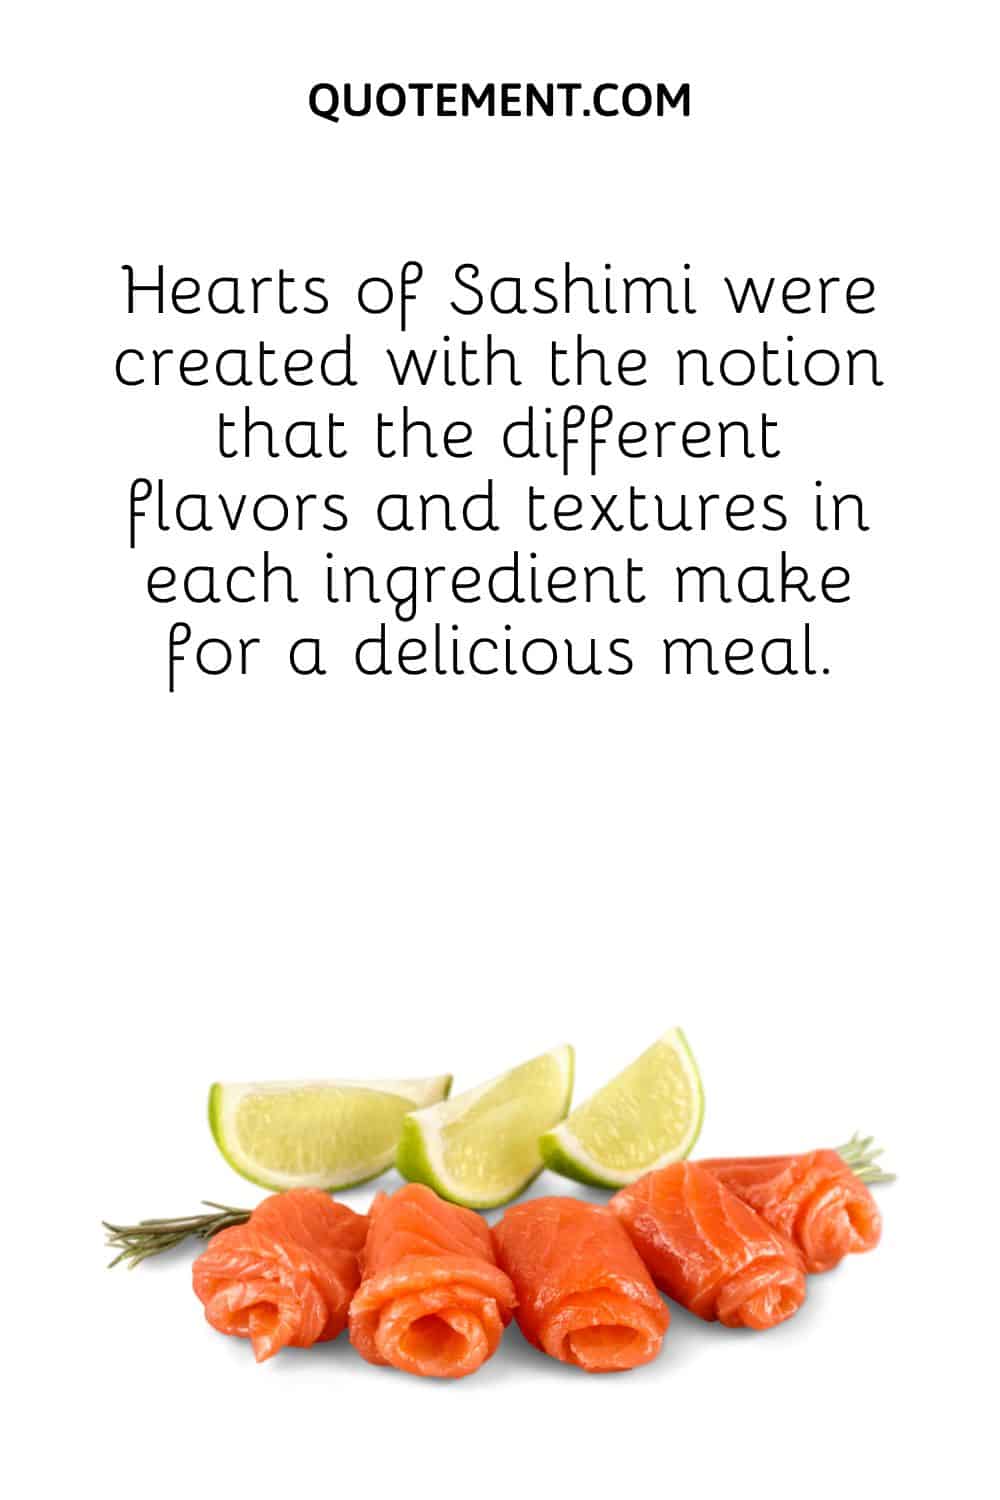 Hearts of Sashimi were created with the notion that the different flavors and textures in each ingredient make for a delicious meal.